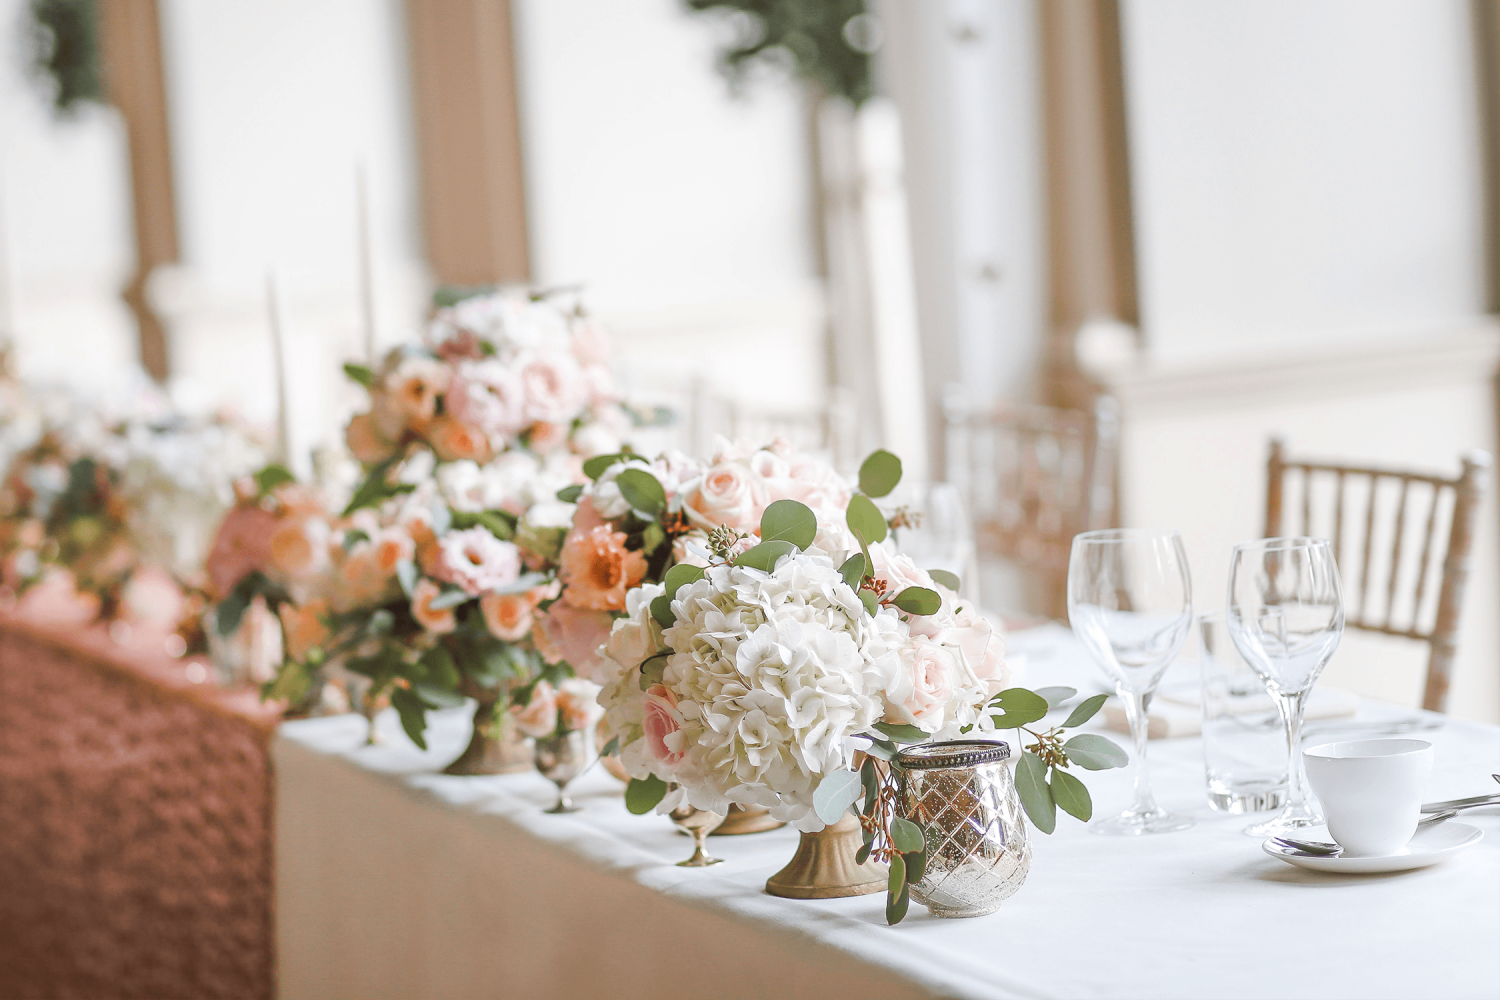 The head table at a wedding with white and pink flowers